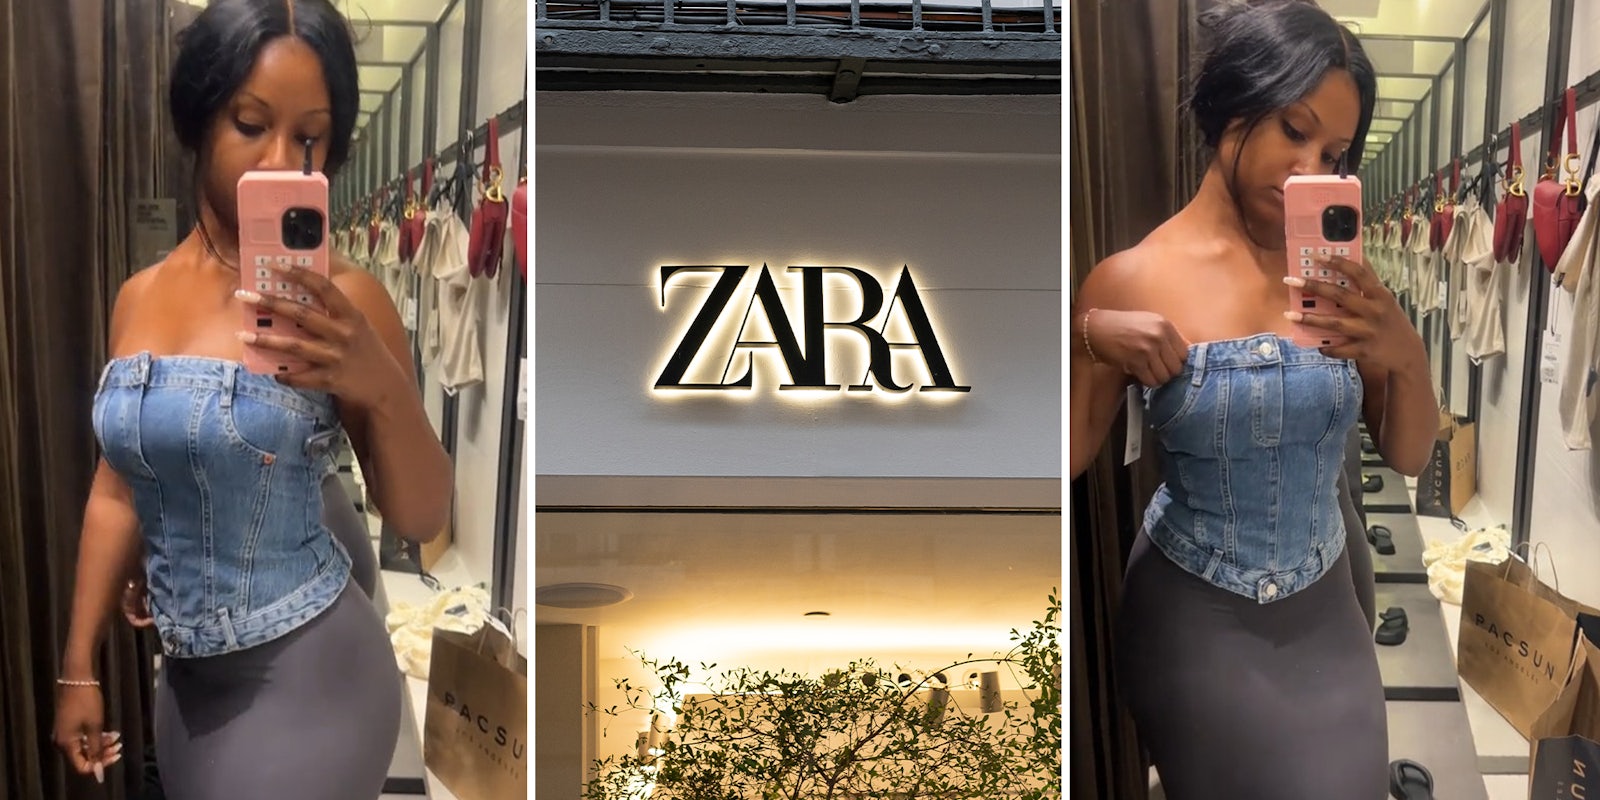 Zara customer tries buying top. The cashier told her she can't have it